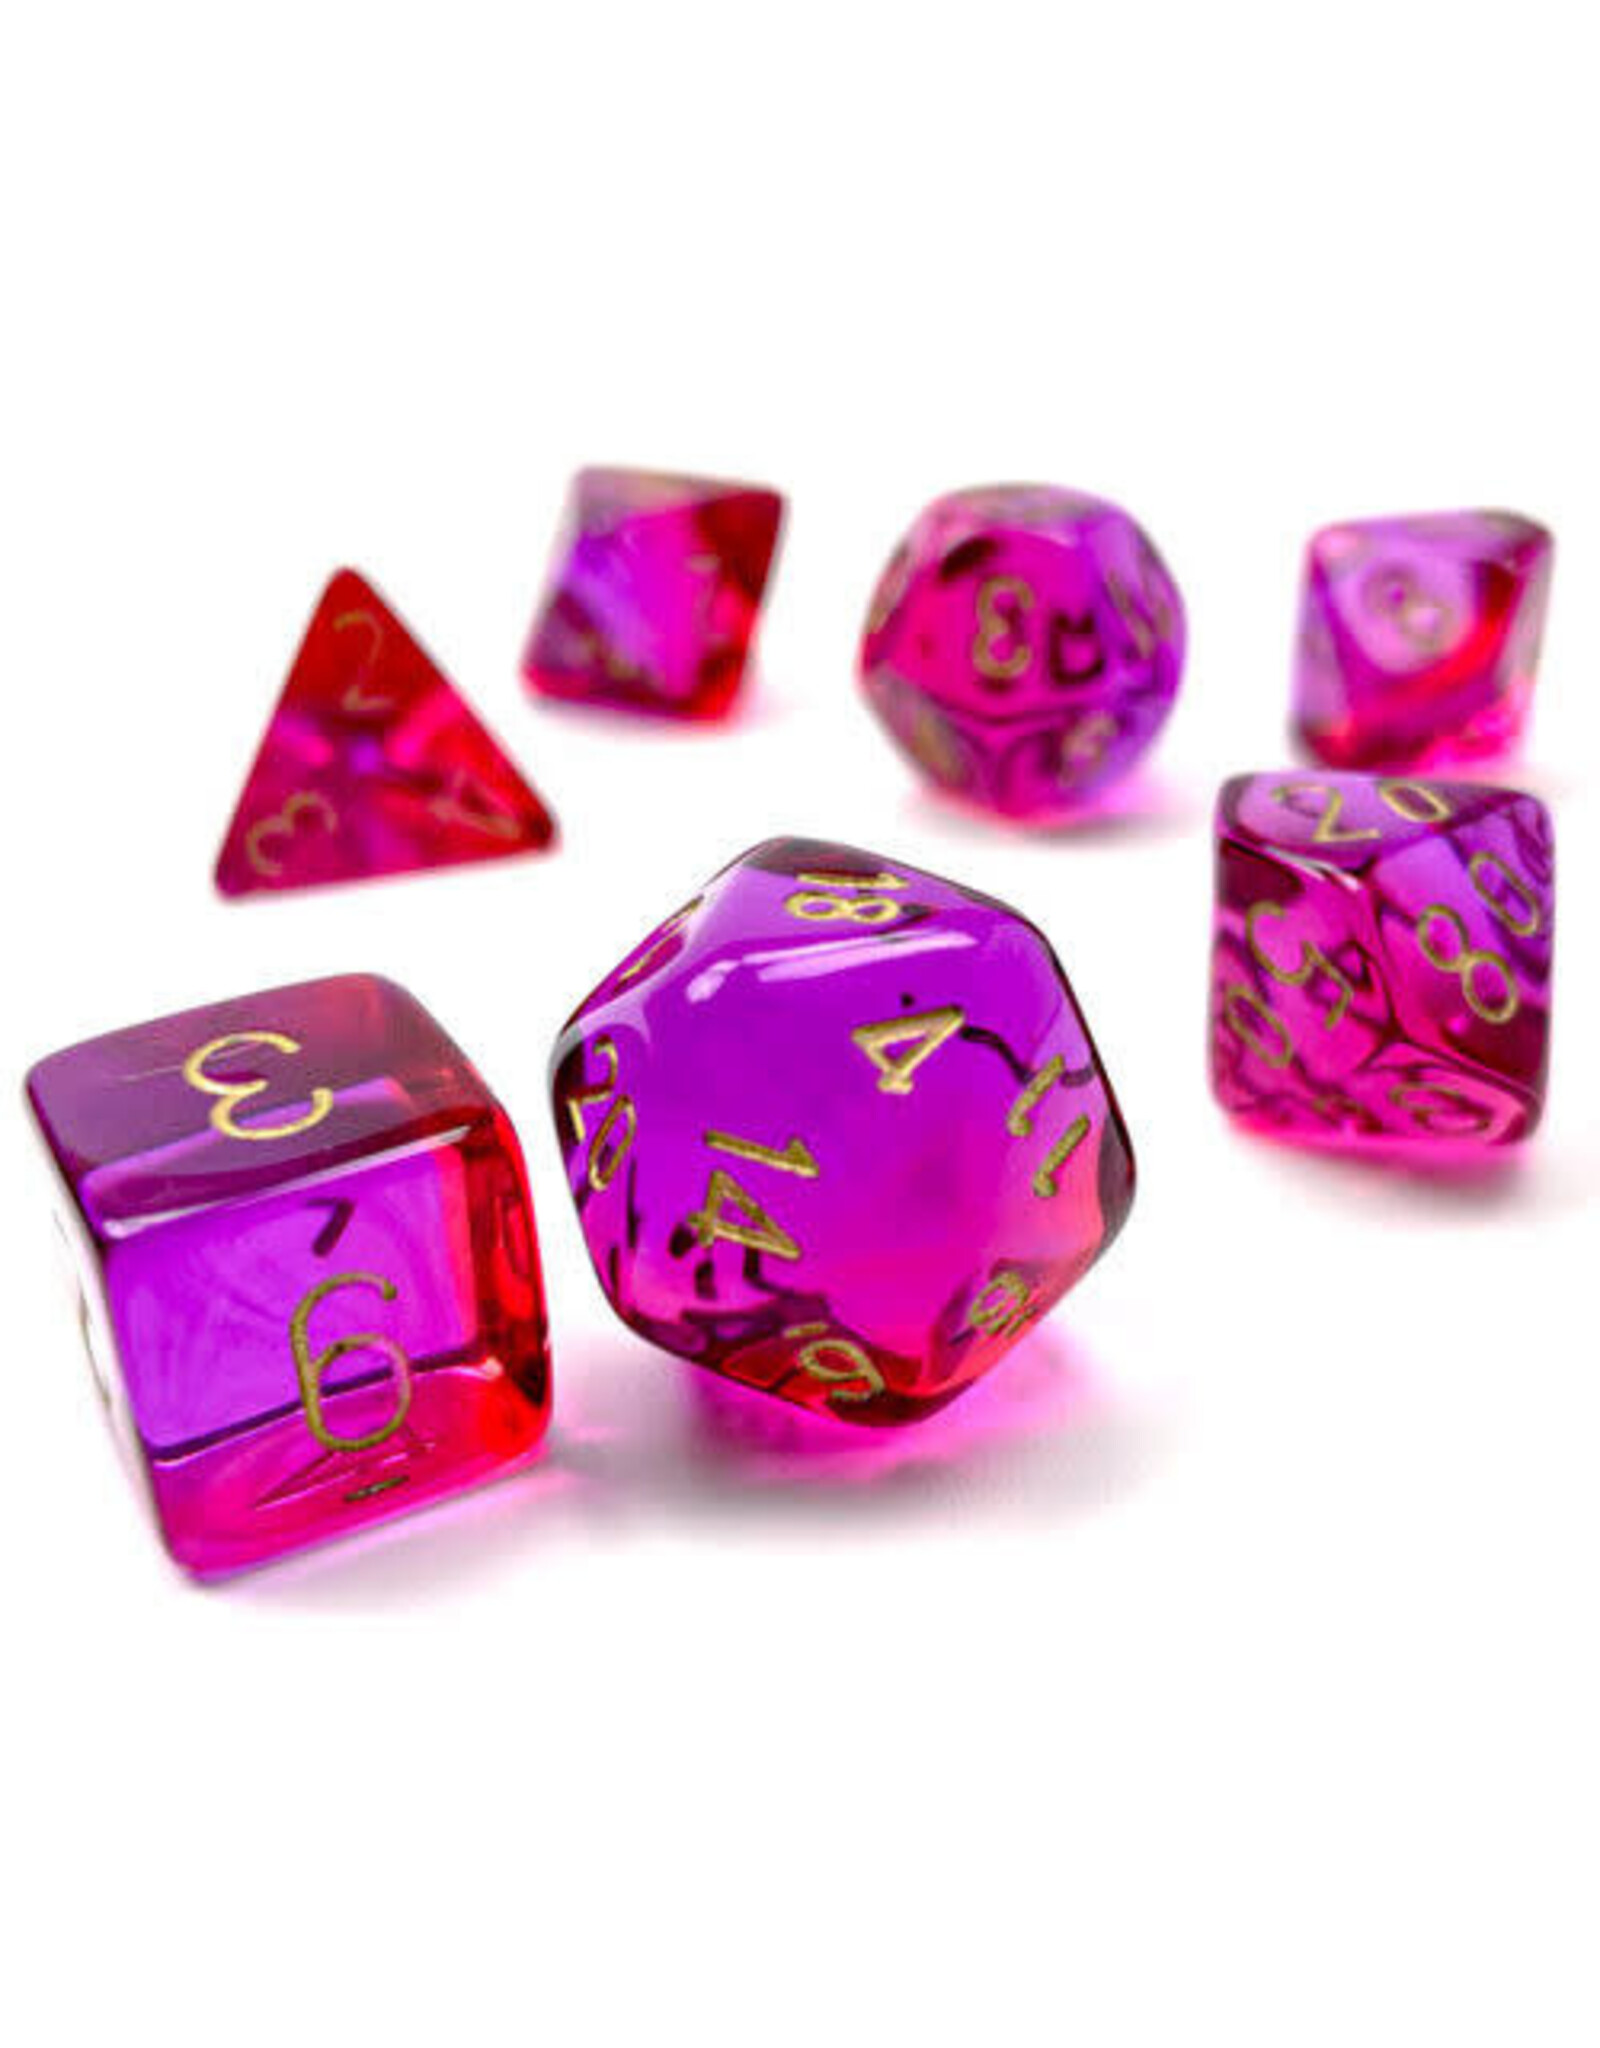 chessex Chessex 7ct Dice Set - Translucent Red/ Violet/ Gold